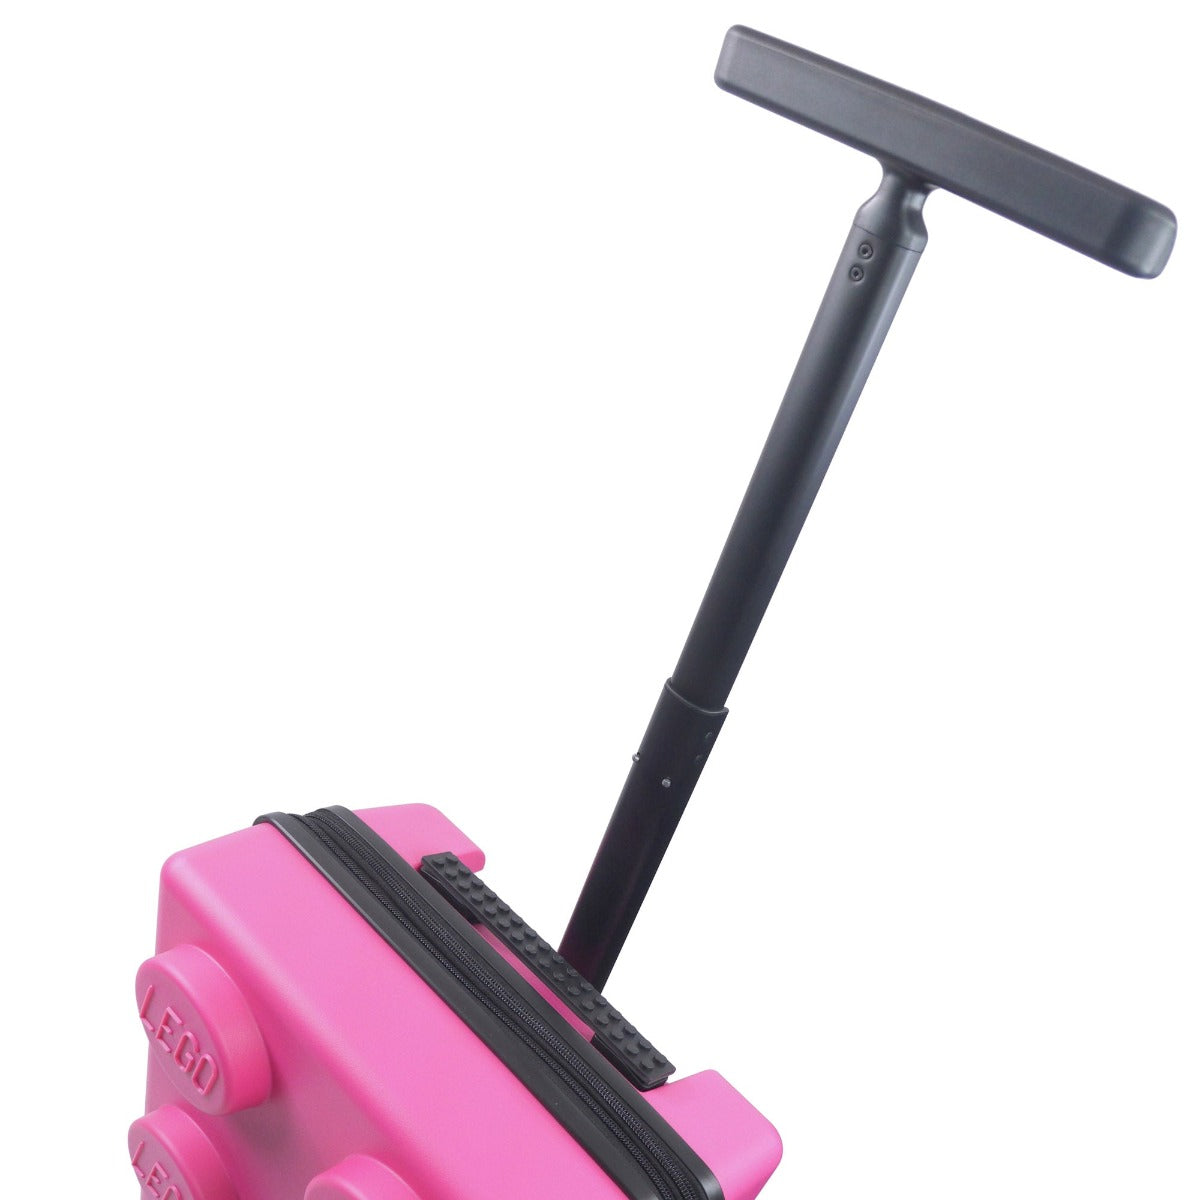 Pink Lego Signature Brick 2X3 trolley expandable 22-inch luggage - best carry-on hard-sided spinner suitcase for traveling